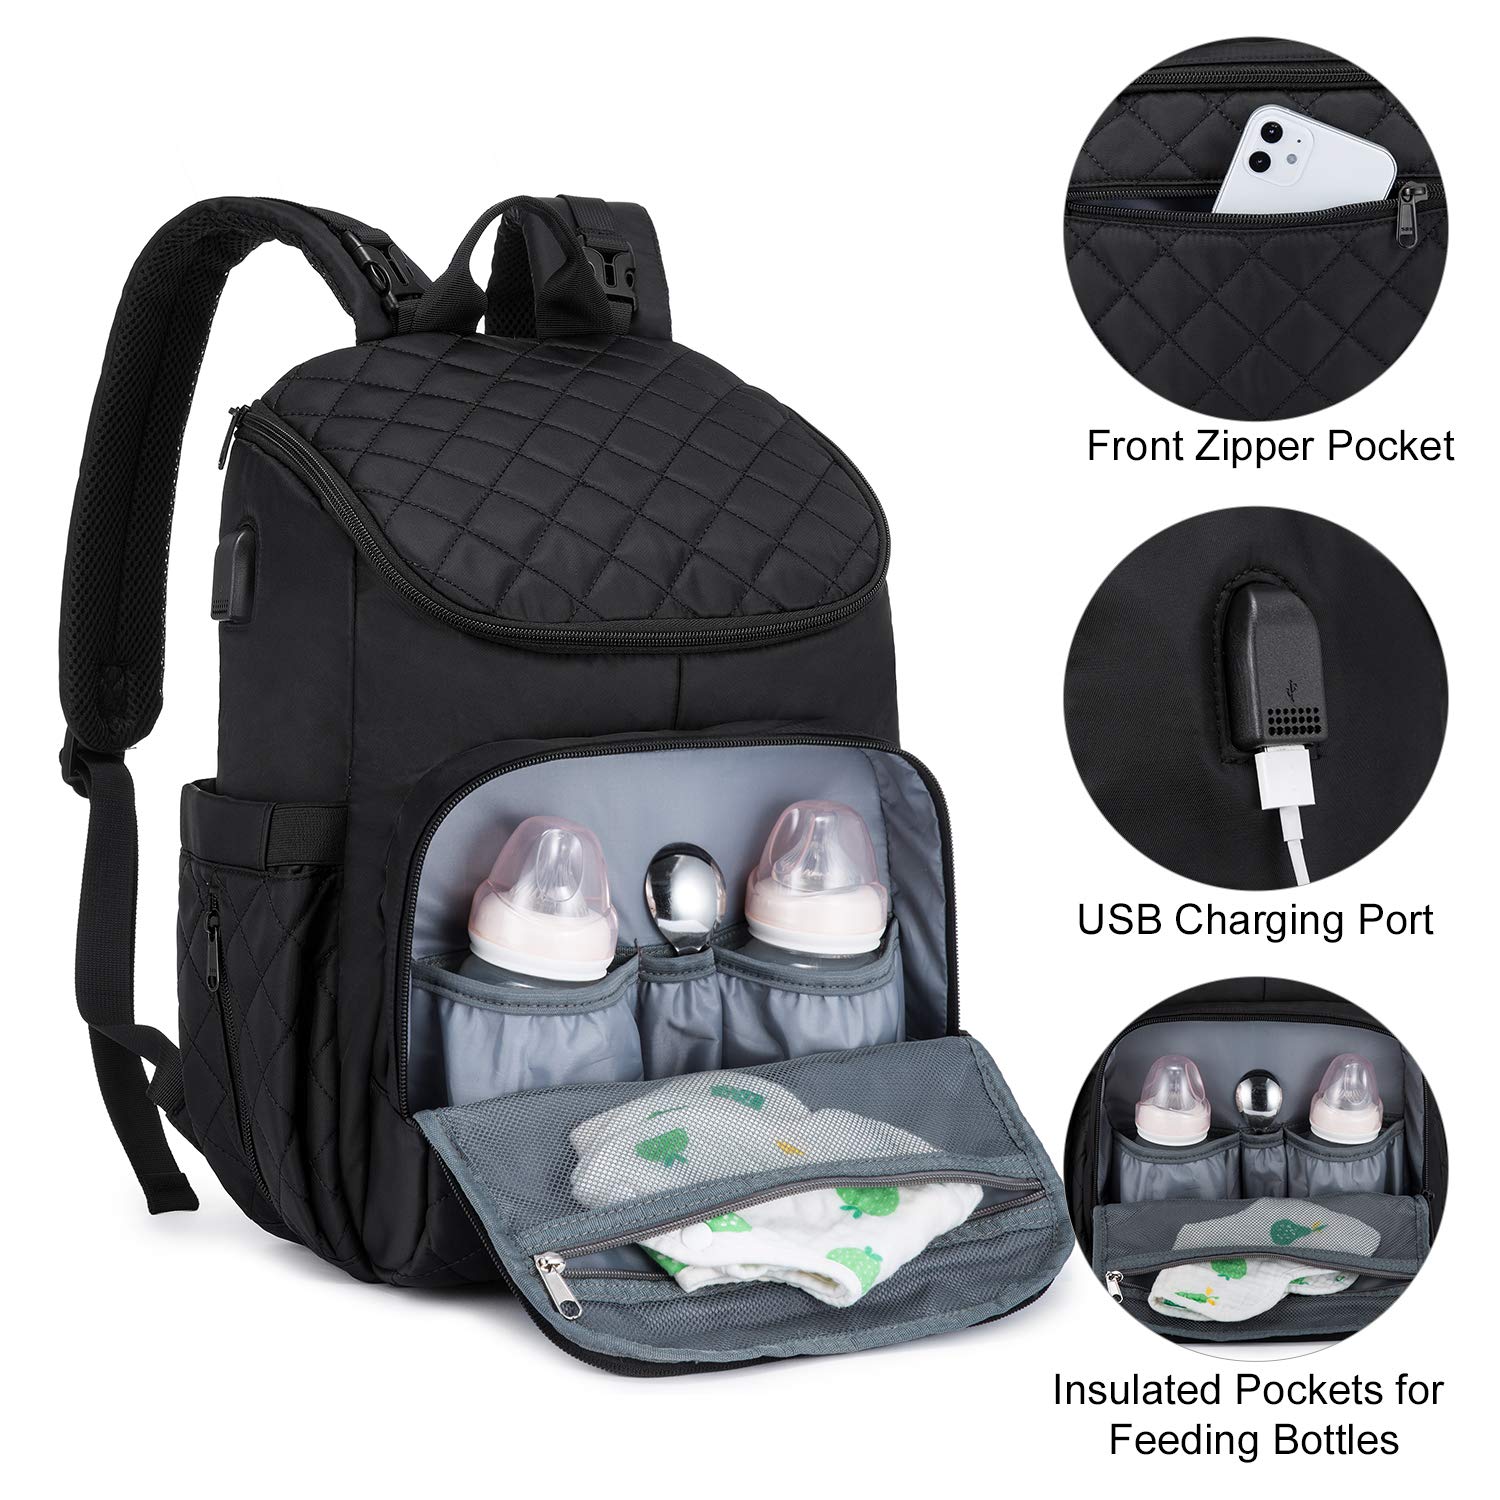 LOVEVOOK Diaper Bag Backpack, Multifunction Travel BackPack with Waterproof Portable Changing Pad, Unisex and Stylish